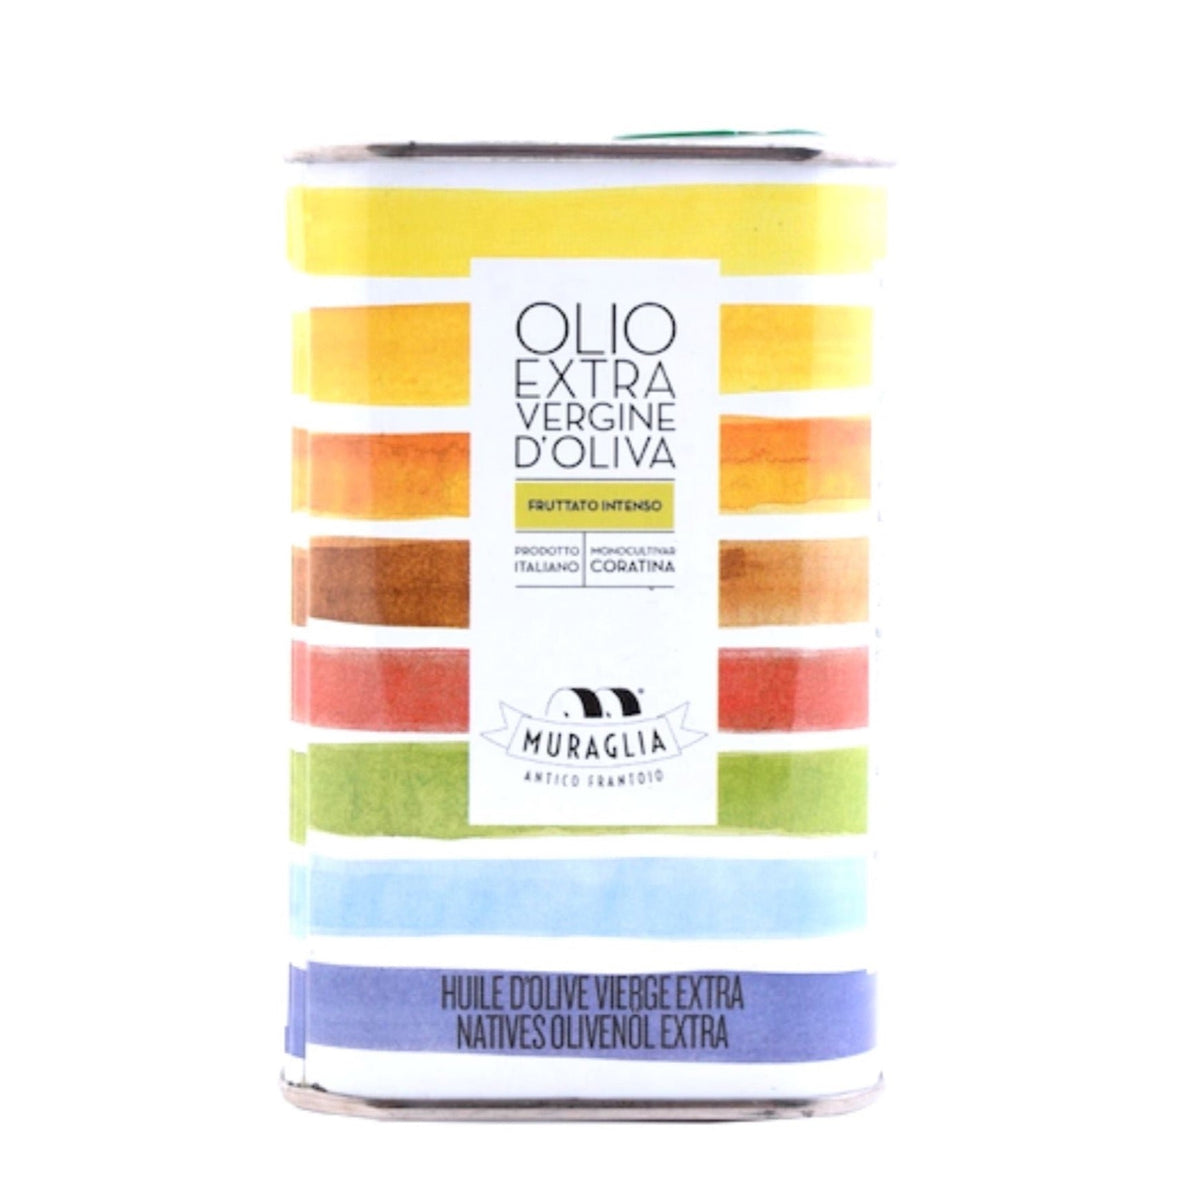 Frantoio Muraglia Rainbow Tin Intense Fruity Coratina Extra Virgin Olive Oil 1000ml  | Imported and distributed in the UK by Just Gourmet Foods